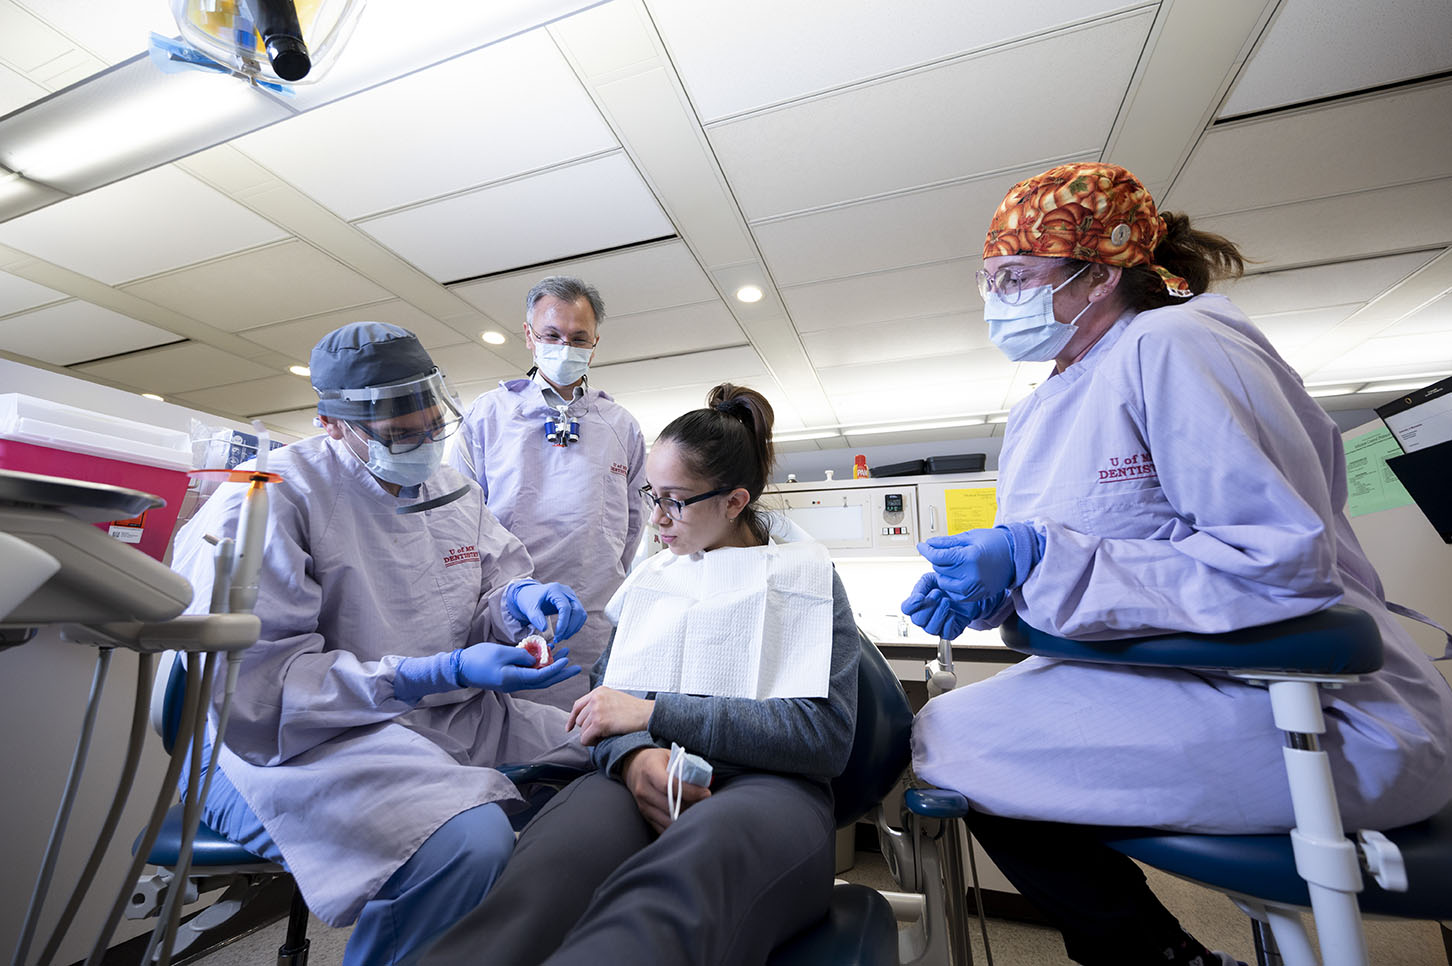 Graduate Prosthodontics faculty and residents consult with a patient